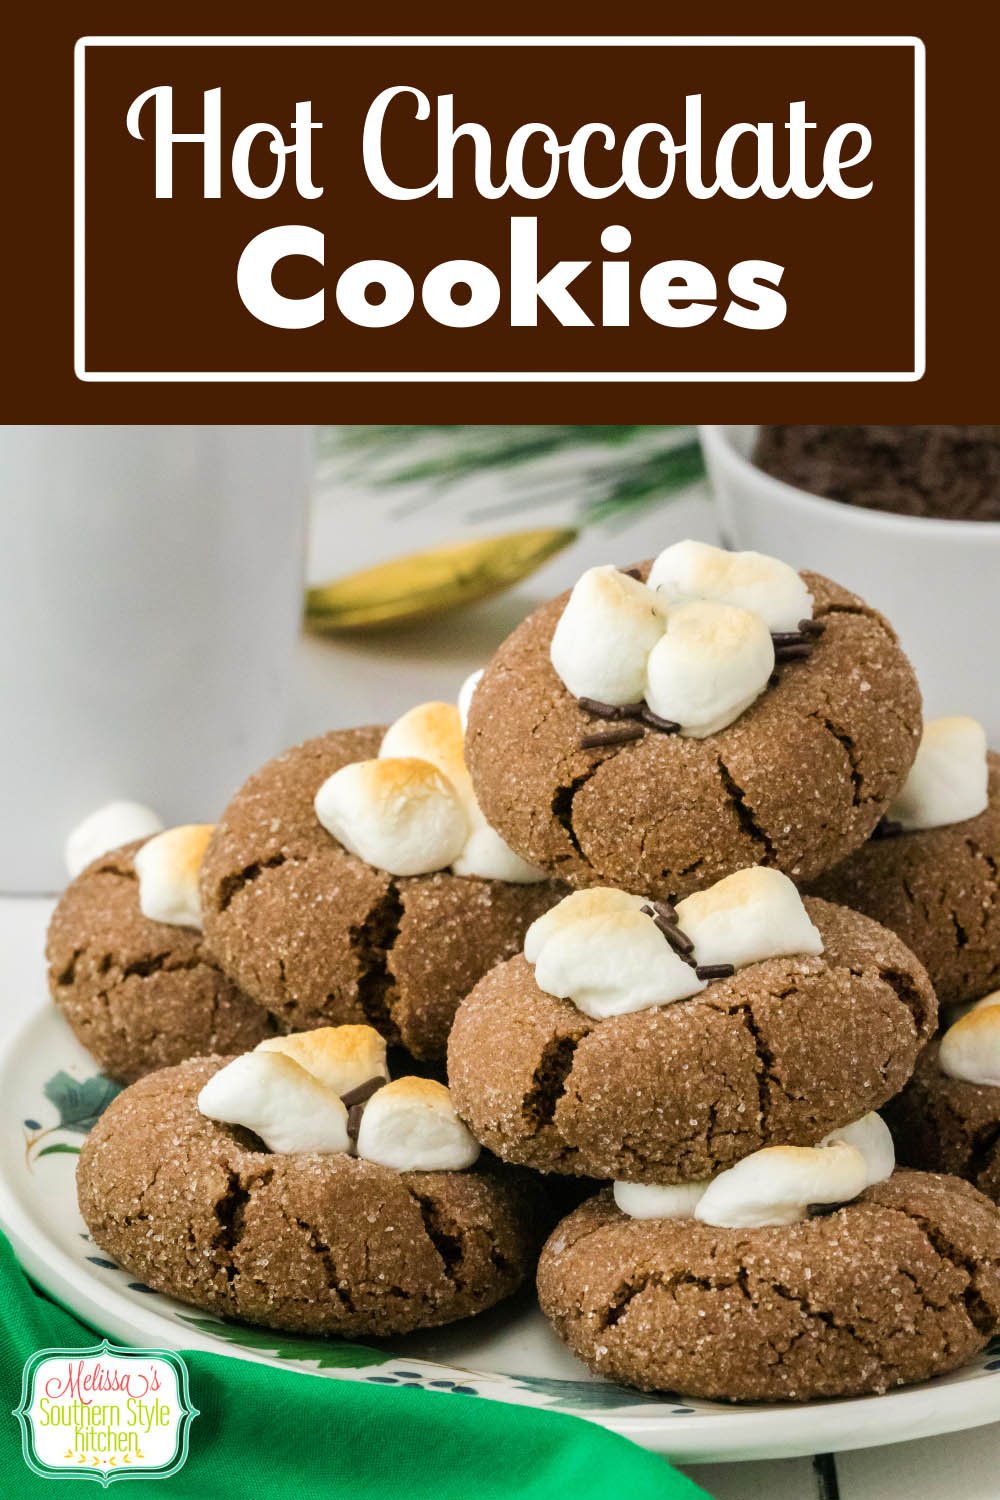 Enjoy these fudgy Hot Chocolate Cookies fresh from the oven while the marshmallows are still gooey and warm. #hotchocolate #chocolatecookies #hotchocolatecookies #christmascookies #cookierecipes via @melissasssk